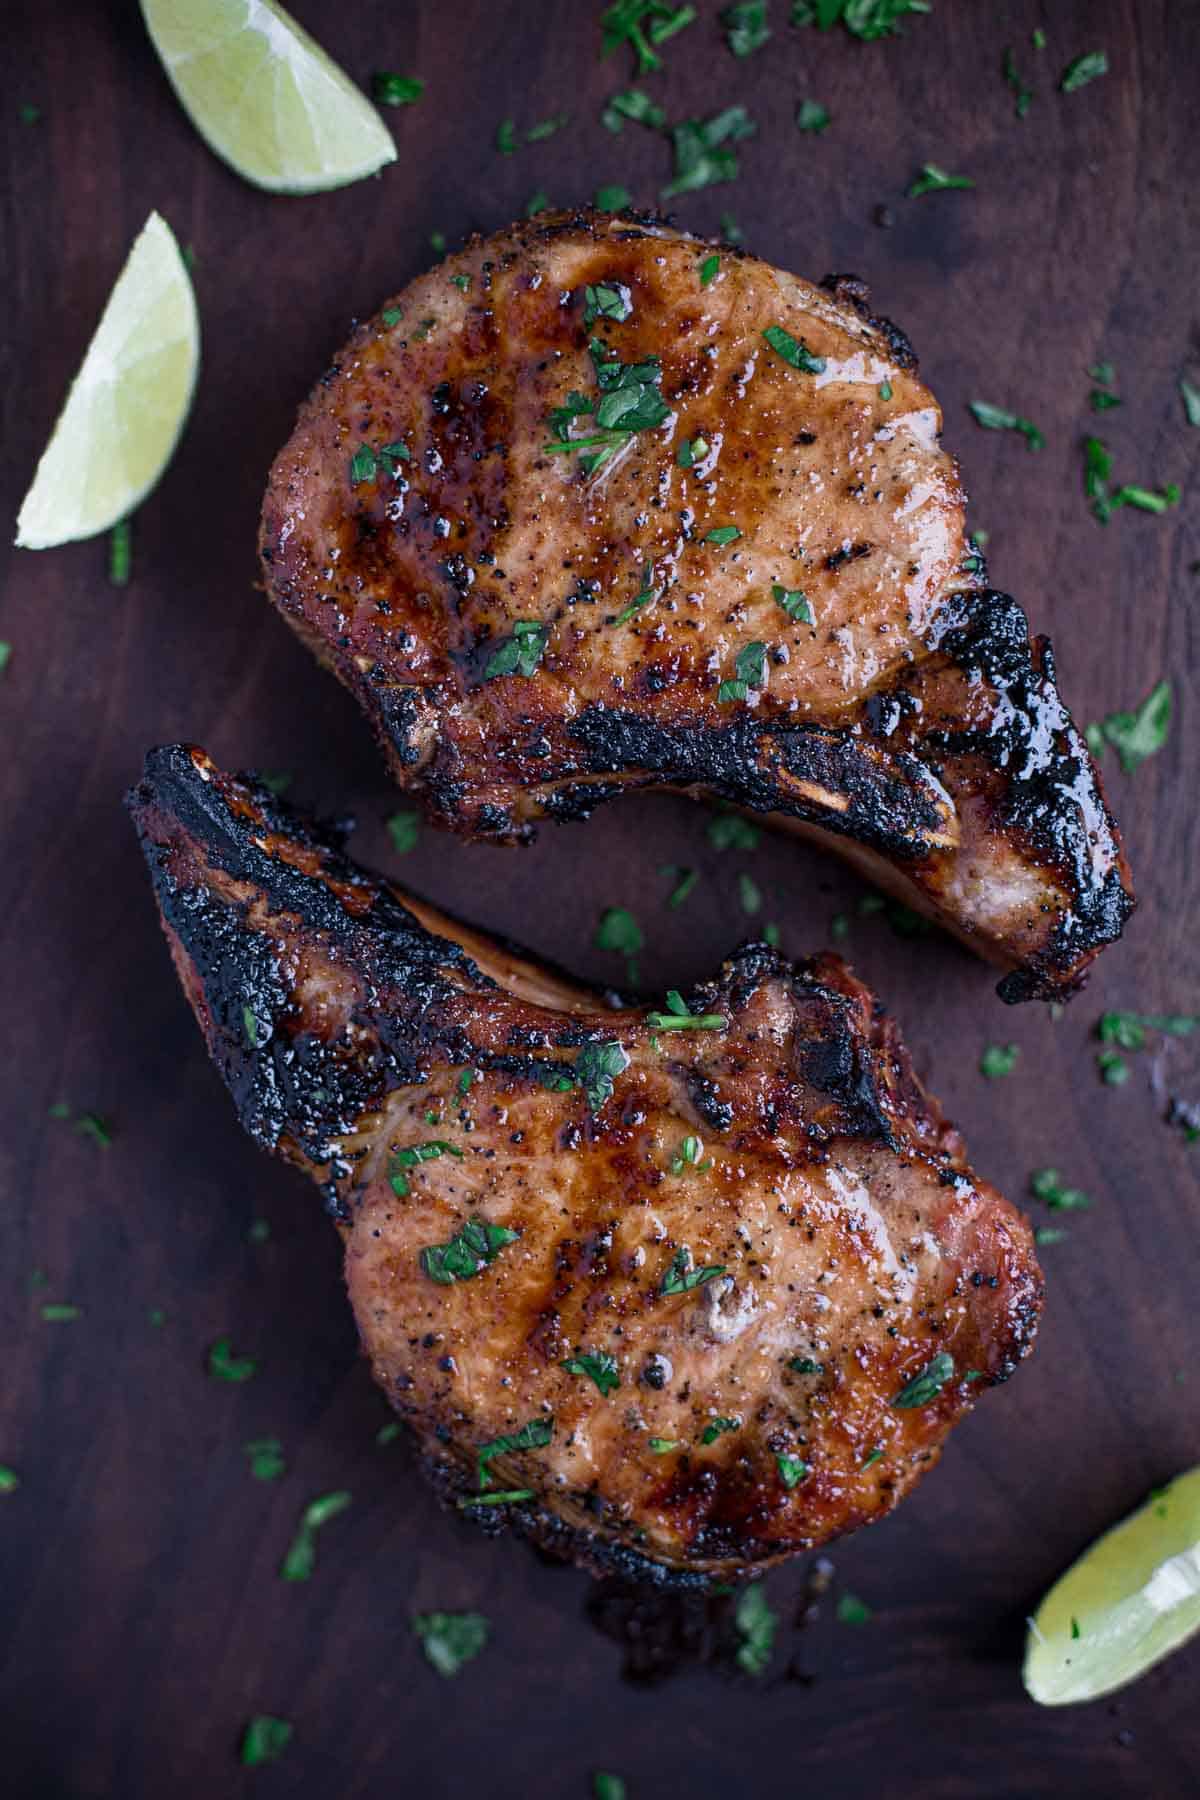 Two grilled pork chops on a wooden cutting board with a wedge of lime.